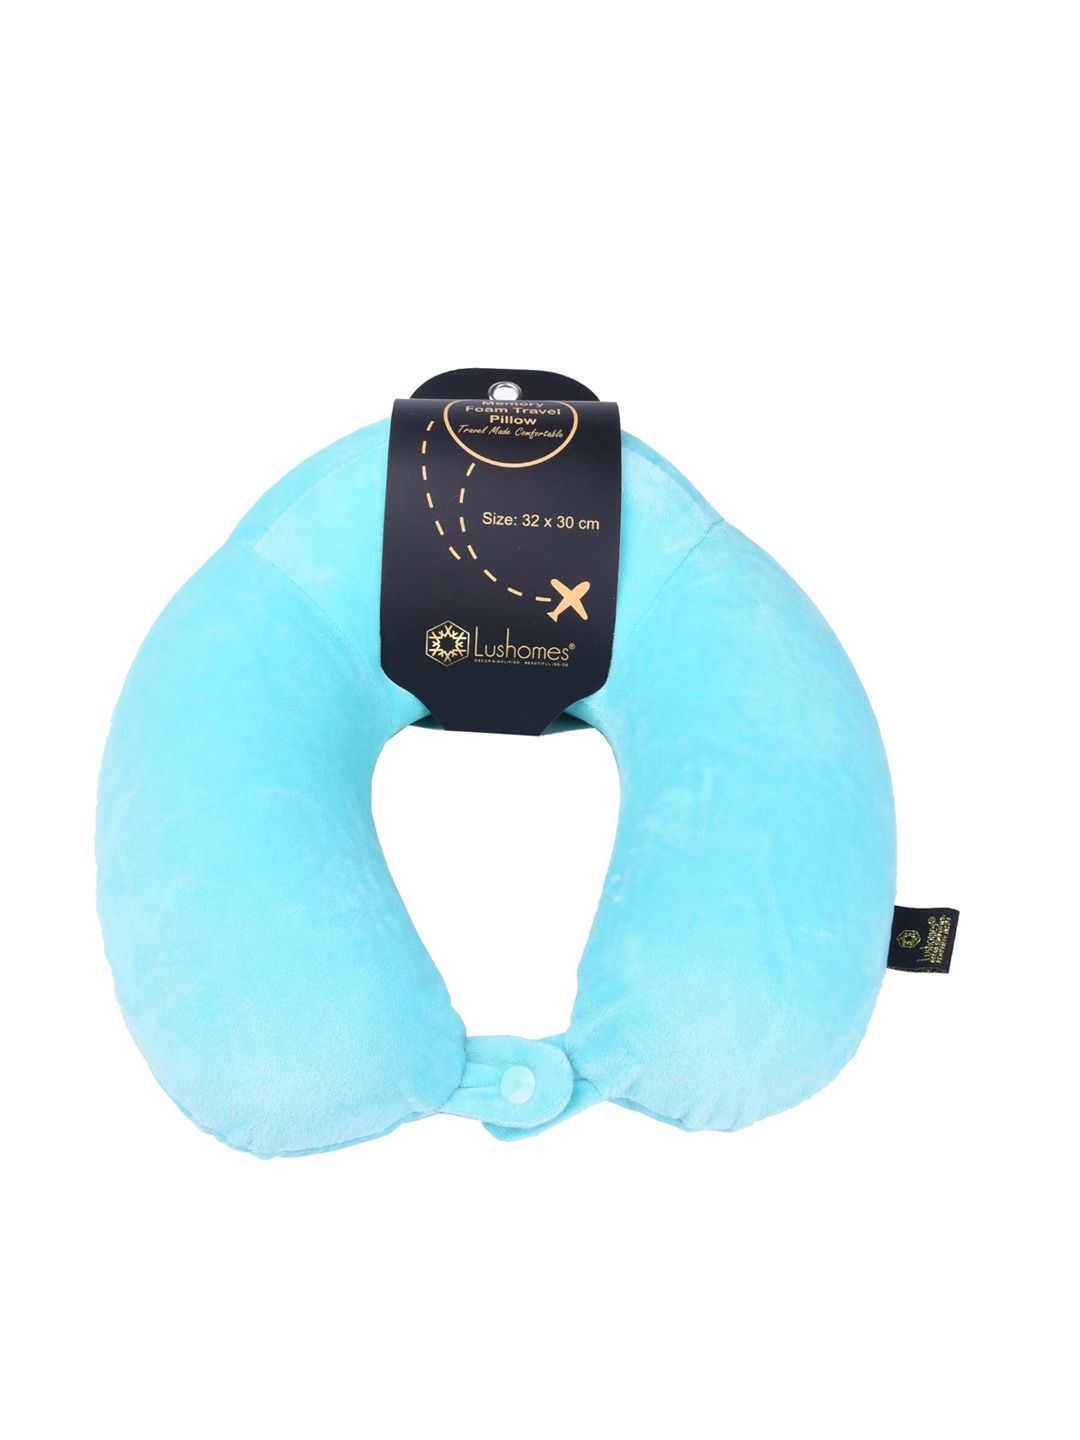 Lushomes Turquoise Blue Cervical Travel Pillow for Neck and Back Support Price in India